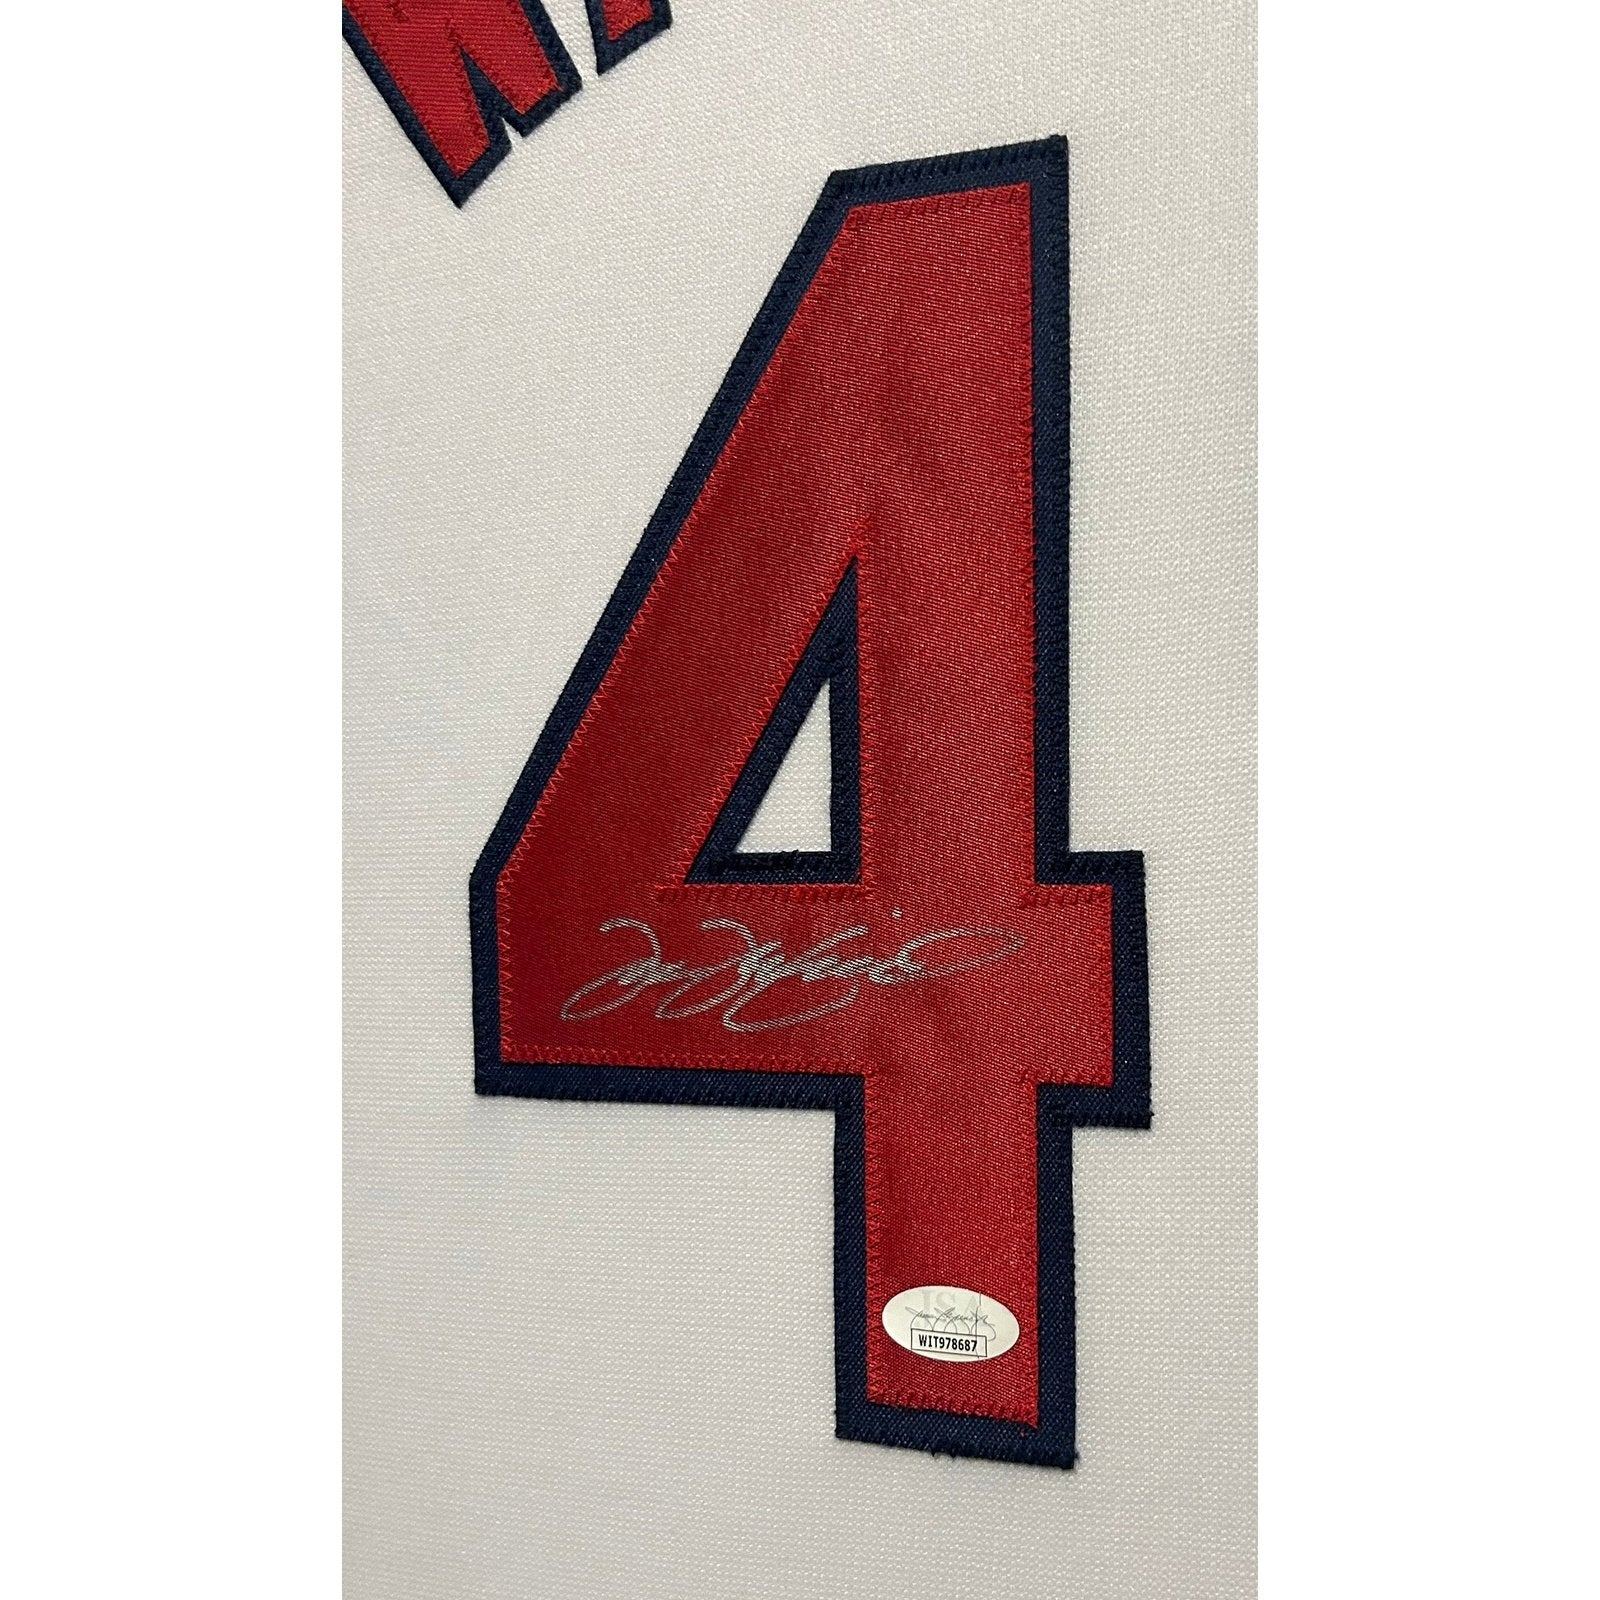 Tim Wakefield Framed Signed White Jersey JSA Autographed Boston Red Sox